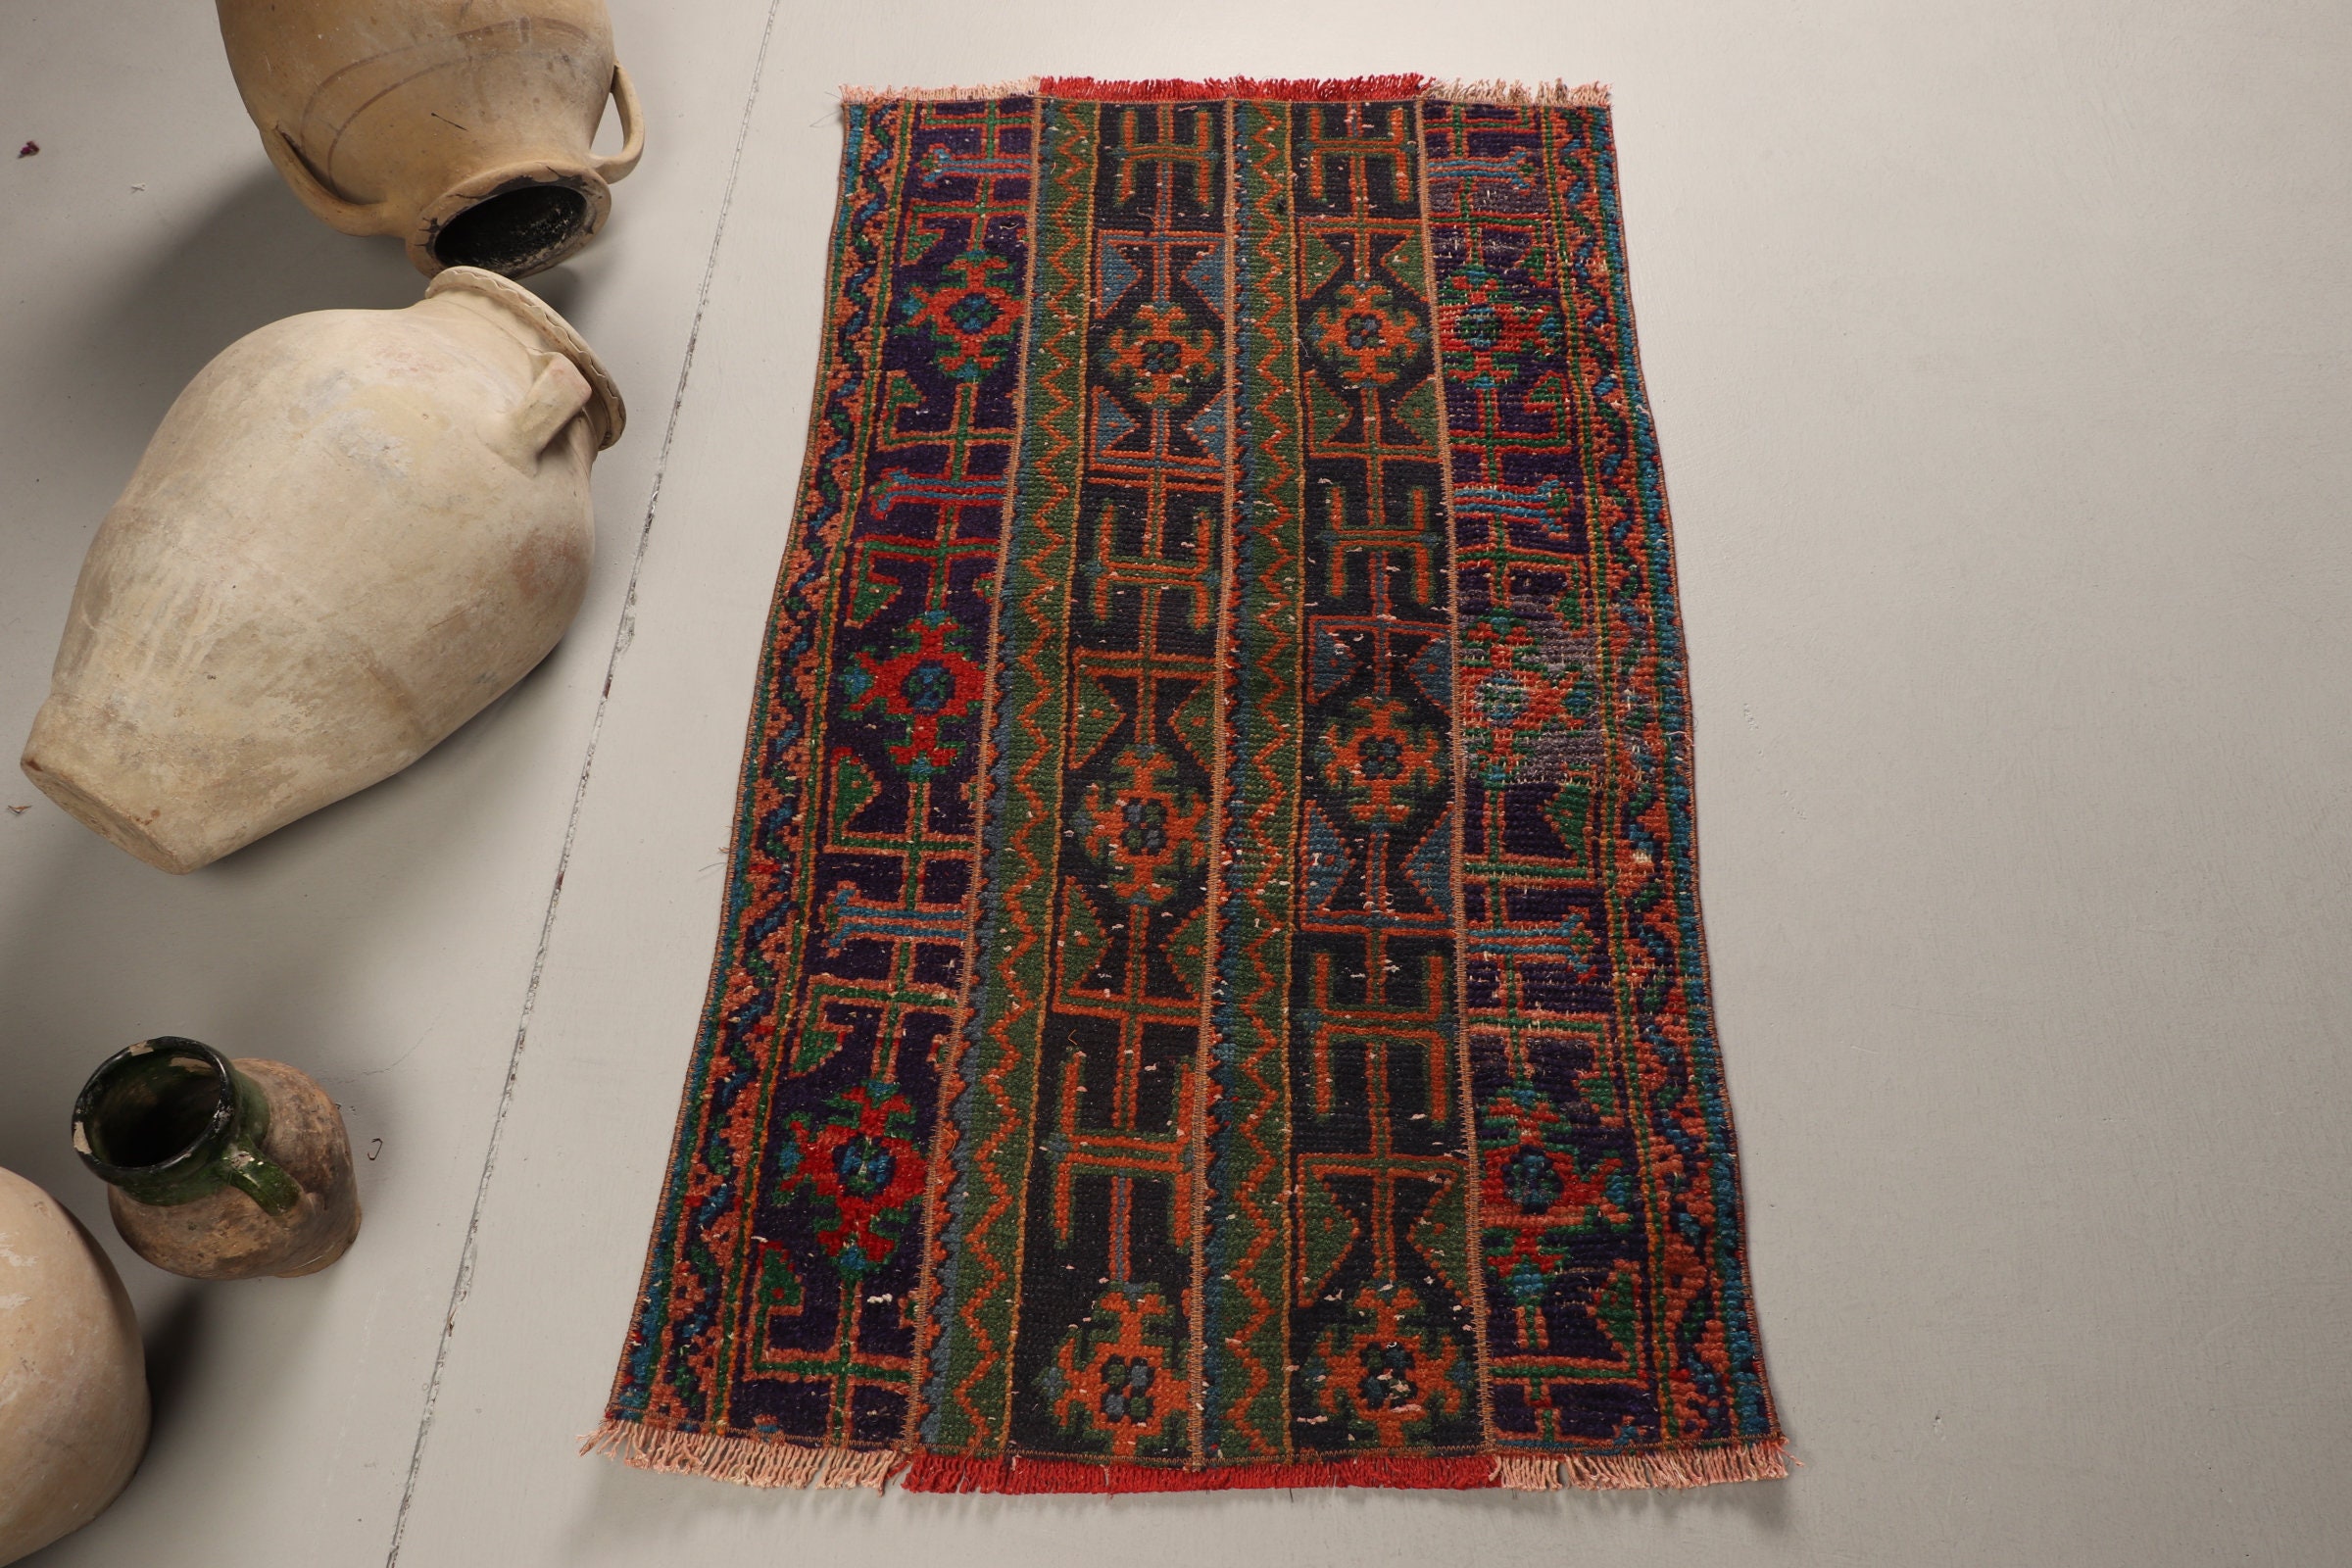 Colorful Rug, Vintage Rugs, 2.3x4 ft Small Rug, Antique Rug, Turkish Rug - Picture 1 of 1